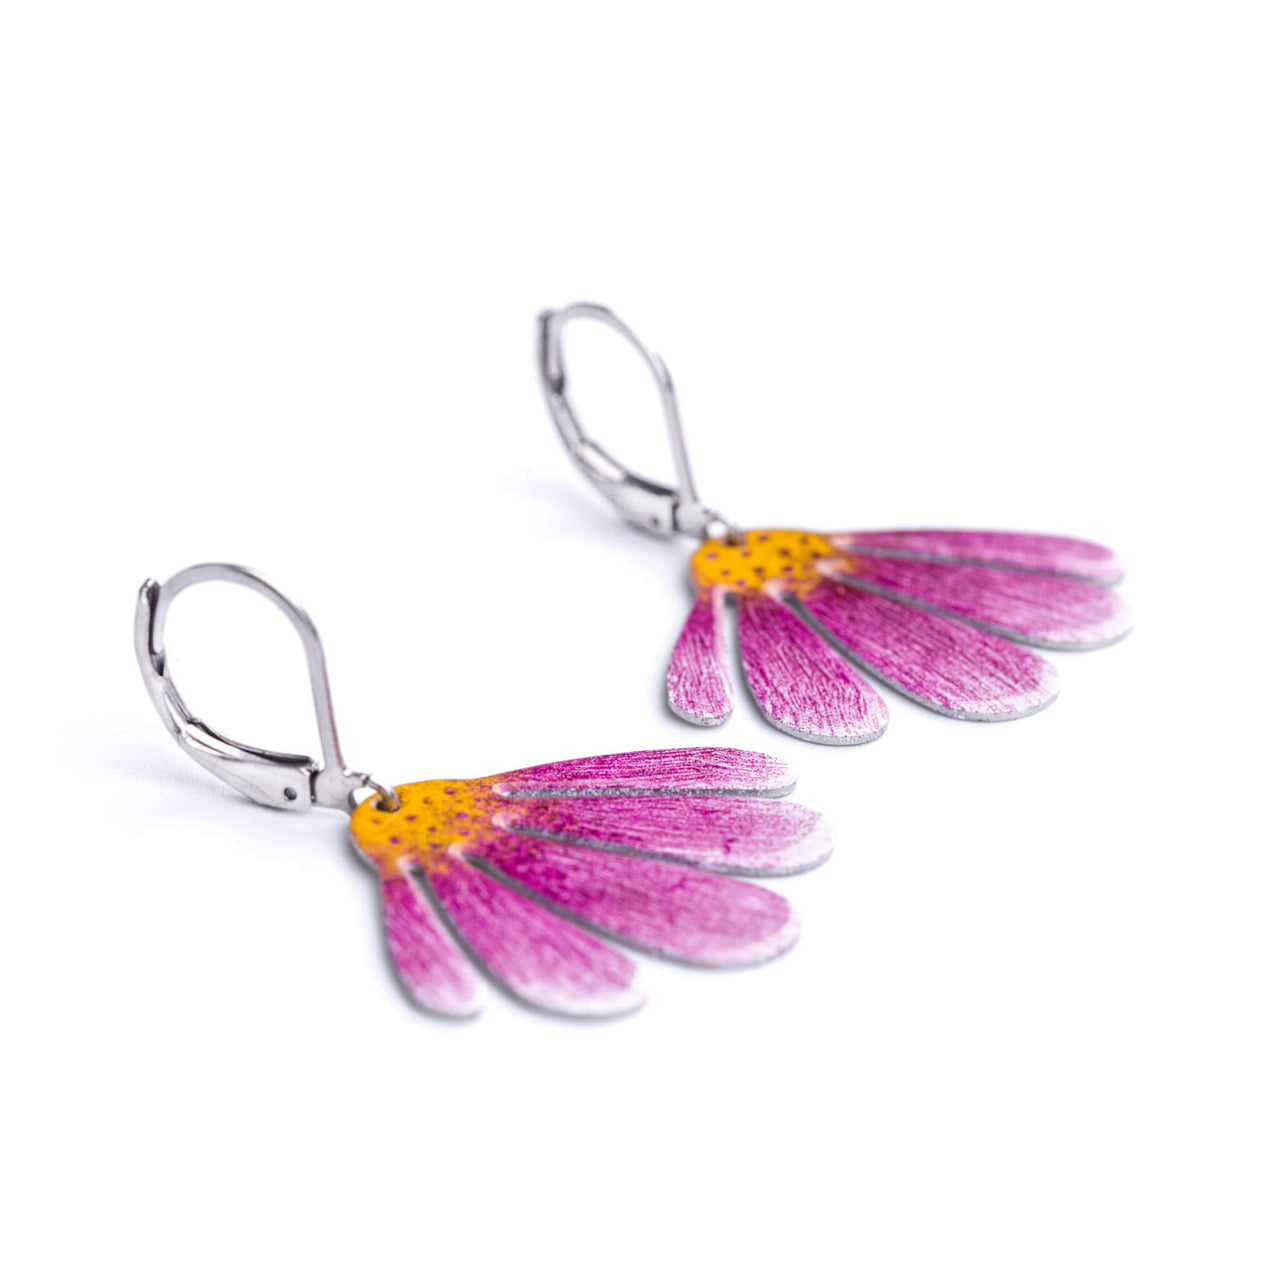 Echinacea earrings with lever back locking - side view